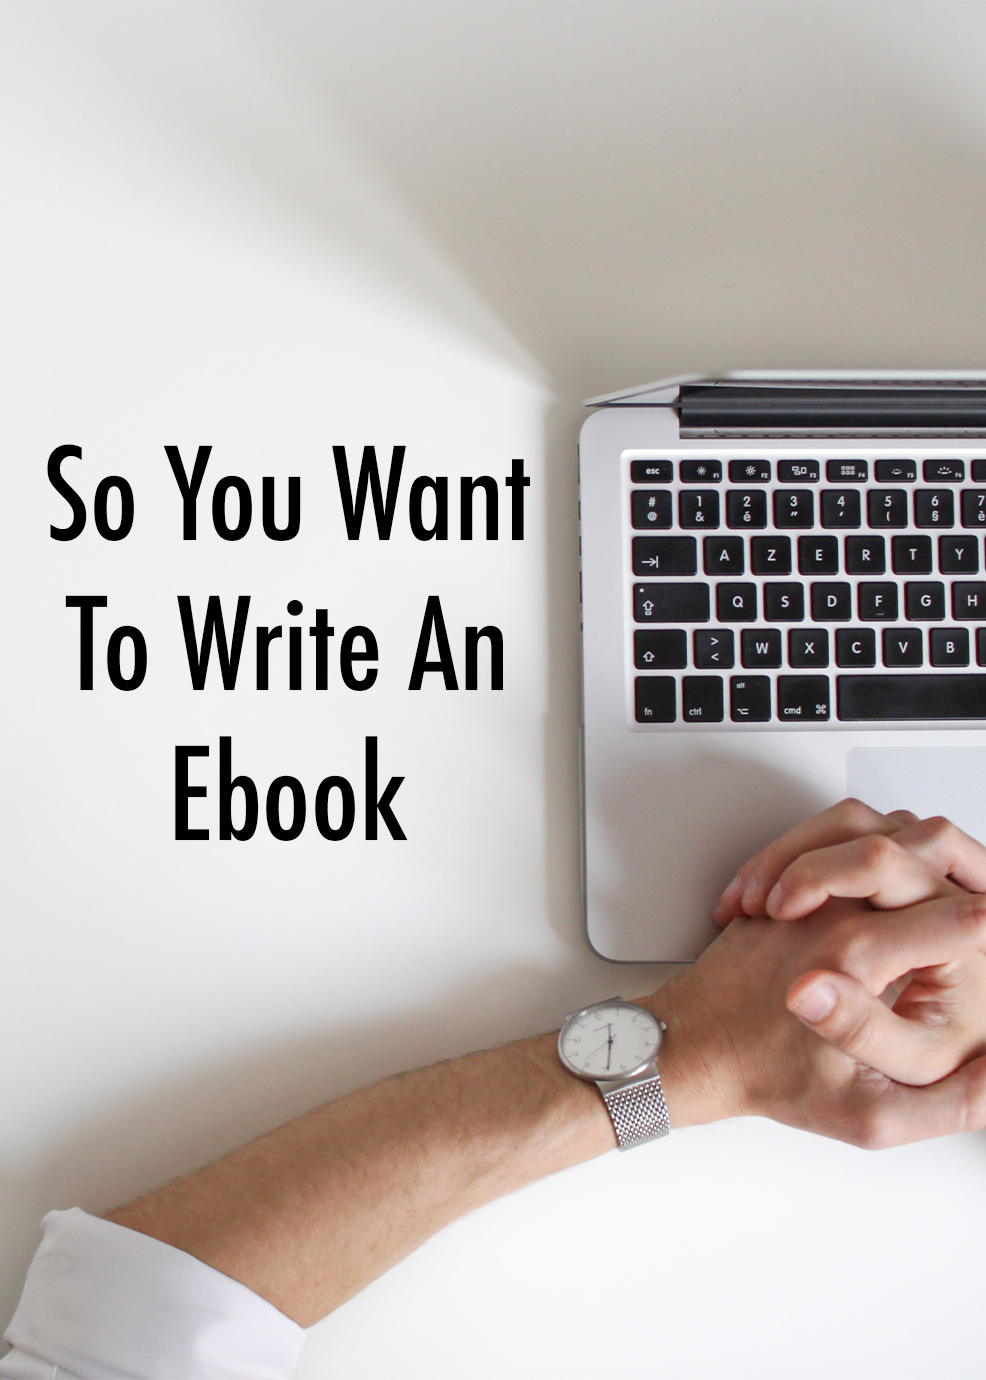 So You Want To Write An Ebook